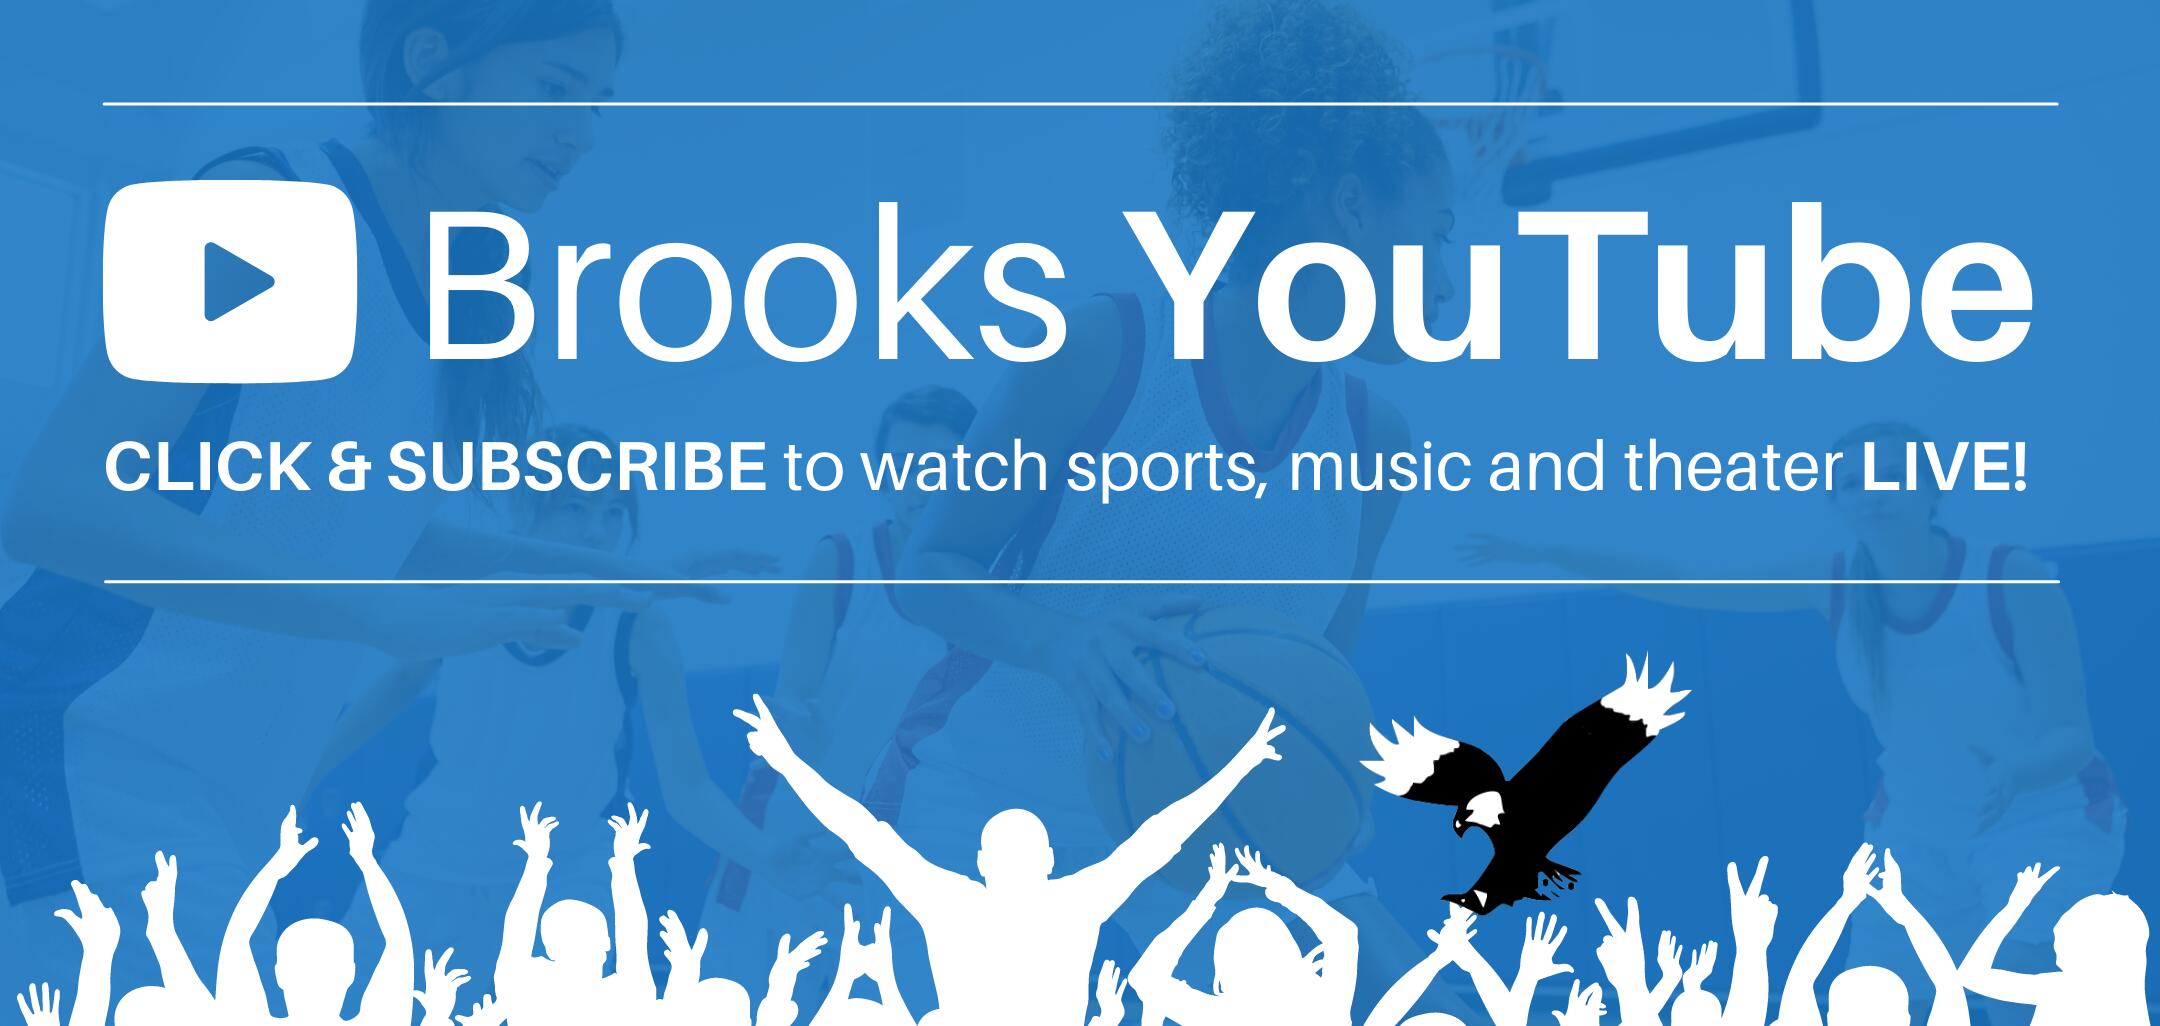 Brooks YouTube - Click & subscribe to watch sports, music and theater